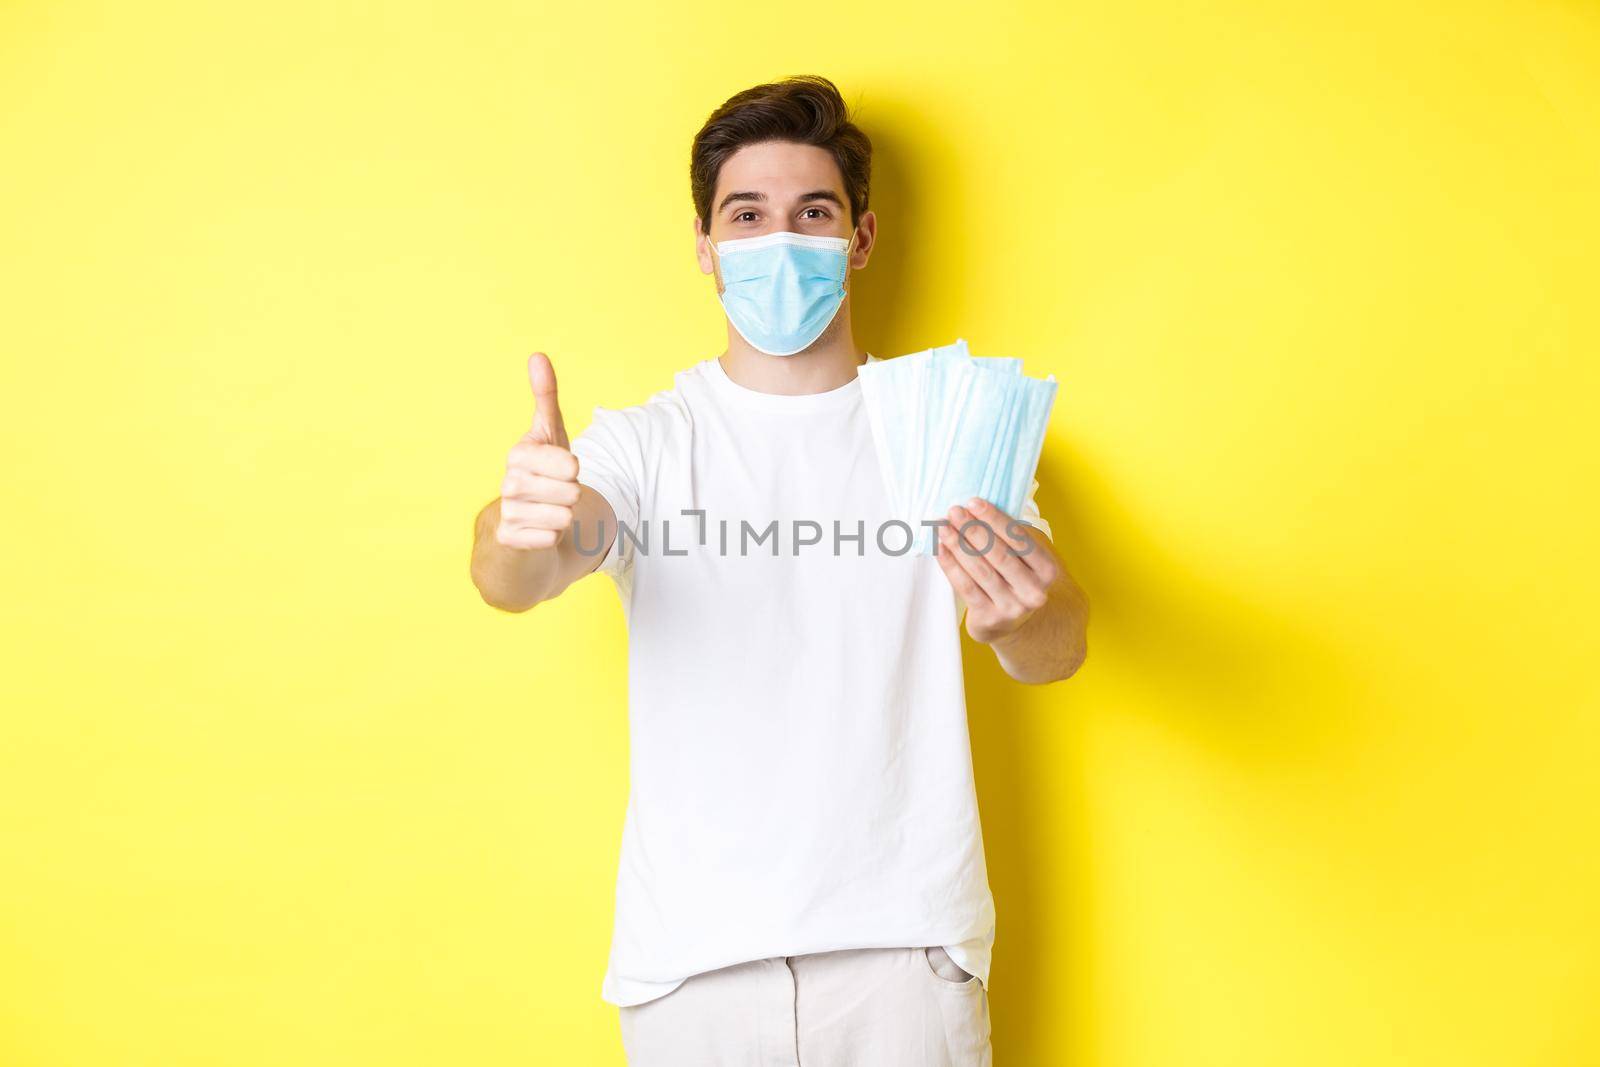 Concept of covid-19, quarantine and preventive measures. Satisfied man showing thumb up and giving medical masks, standing over yellow background.